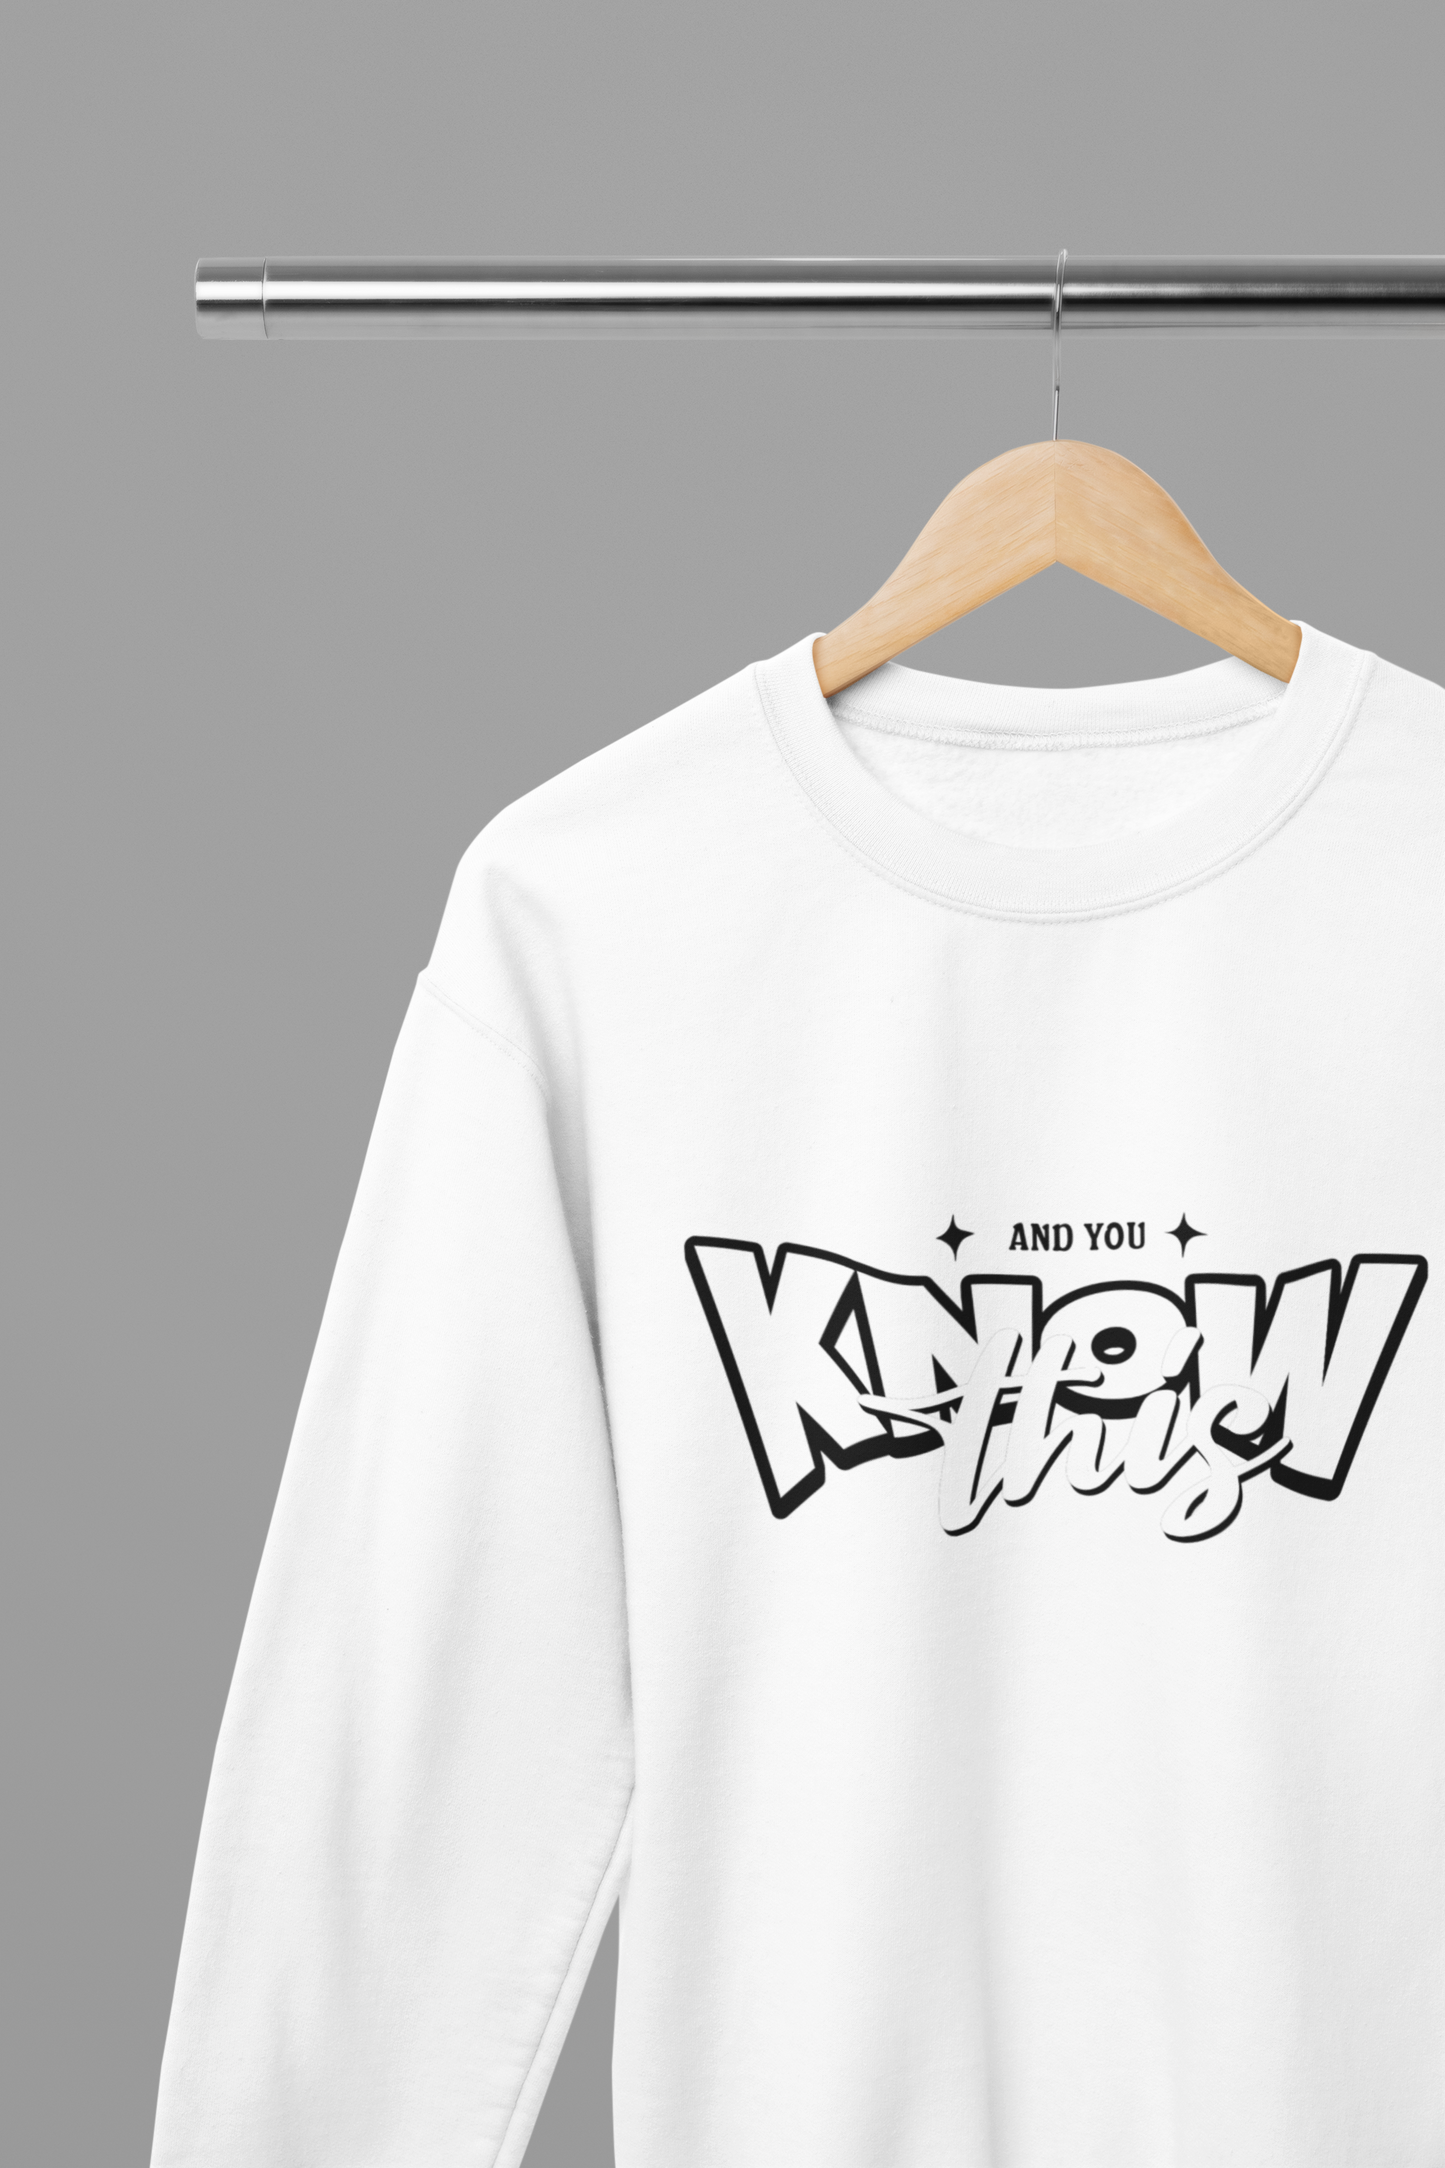 And You Know This Quote Friday Movie T-Shirt/Sweatshirt